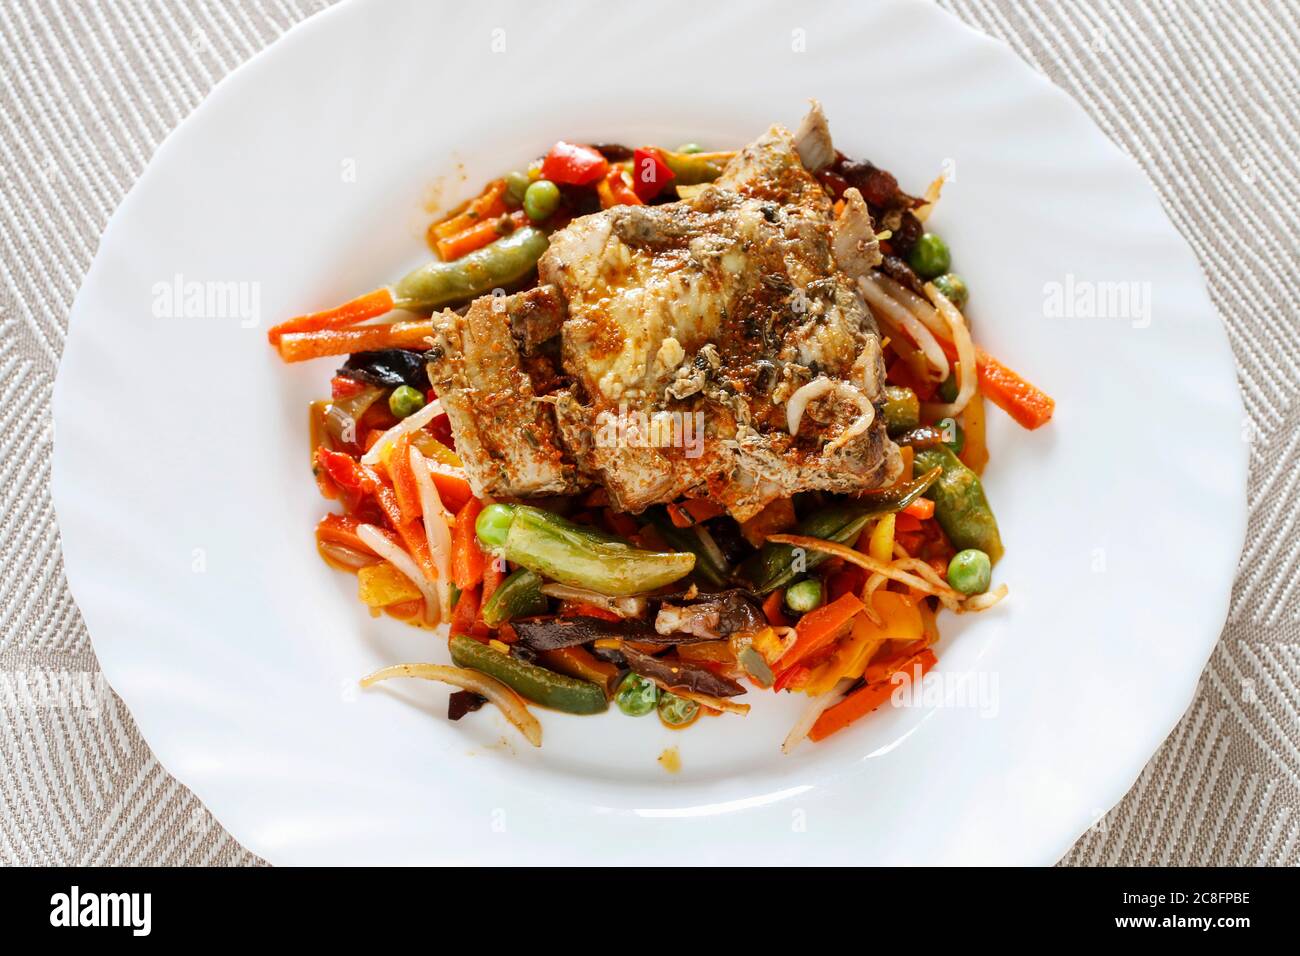 Roasted ribs with herbs and vegetables. Lunch time Stock Photo